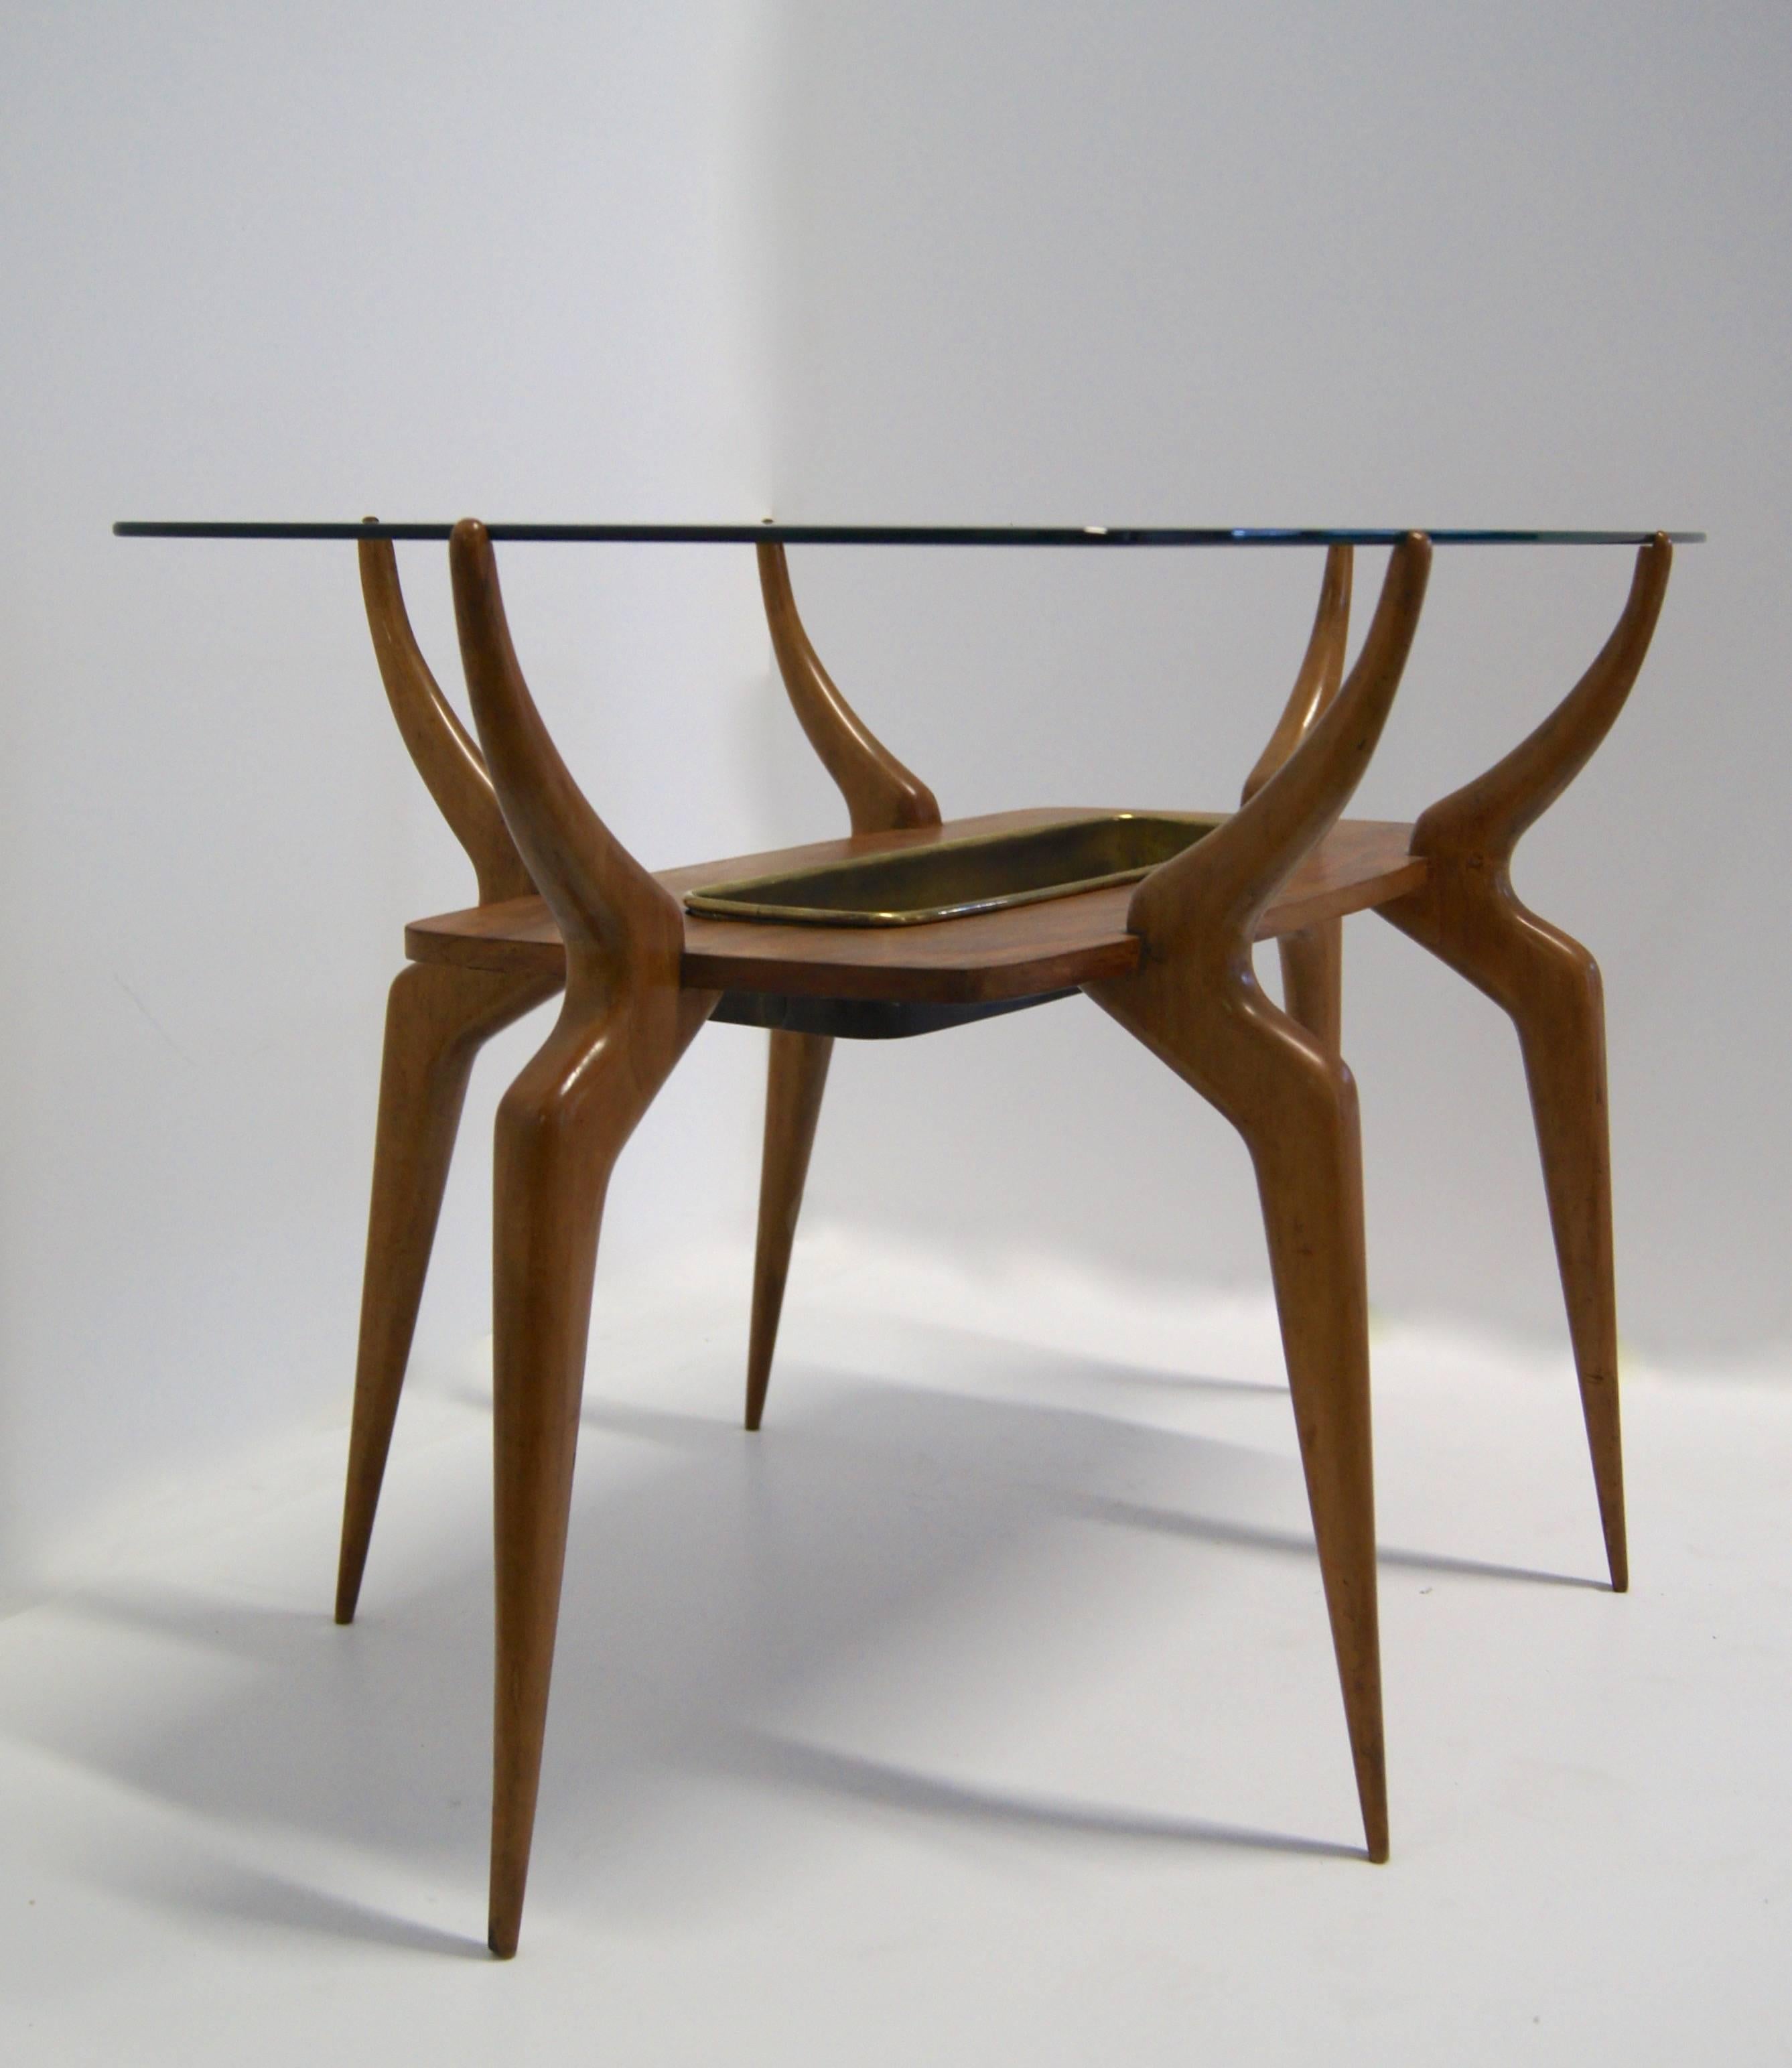 Sculptural spider-leg coffee or cocktail table with glass top and yellow copper removable tray or bar section,
Italian, circa 1950.